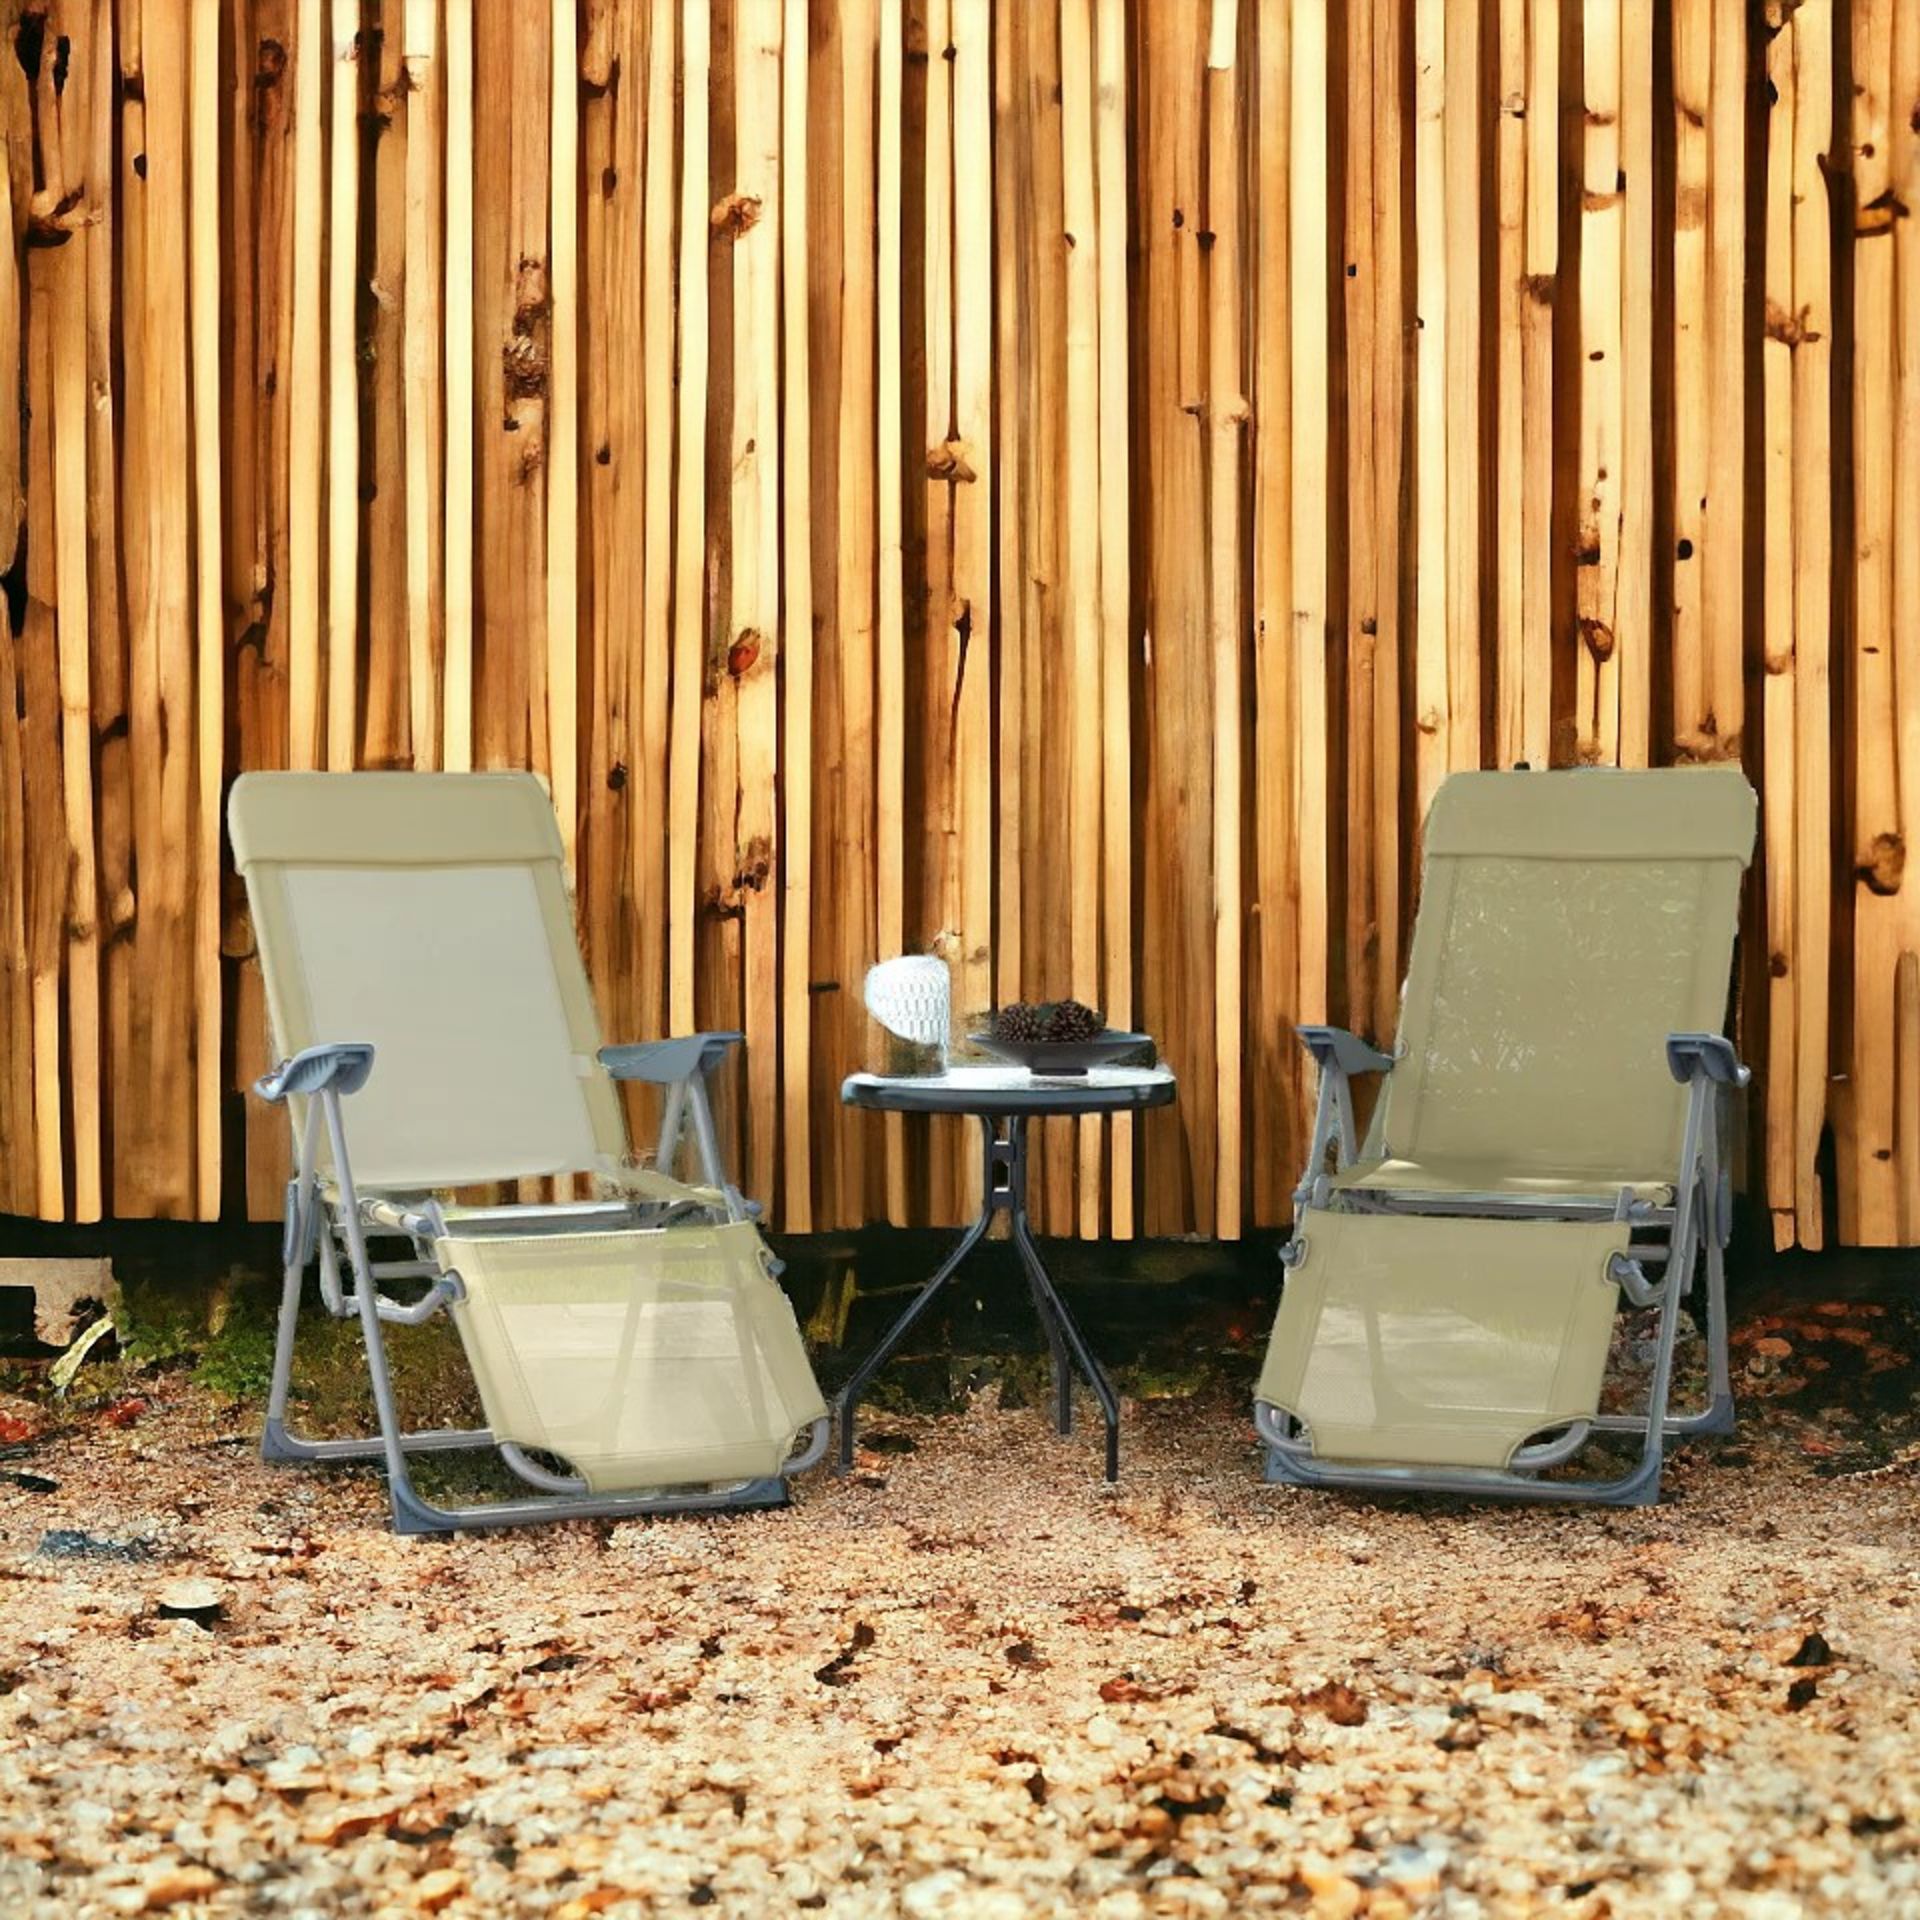 FREE DELIVERY - BRAND NEW RECLINING GARDEN CHAIRS SET OF 2 W/ 5-LEVEL ADJUSTABLE BACKREST, BEIGE - Image 2 of 2